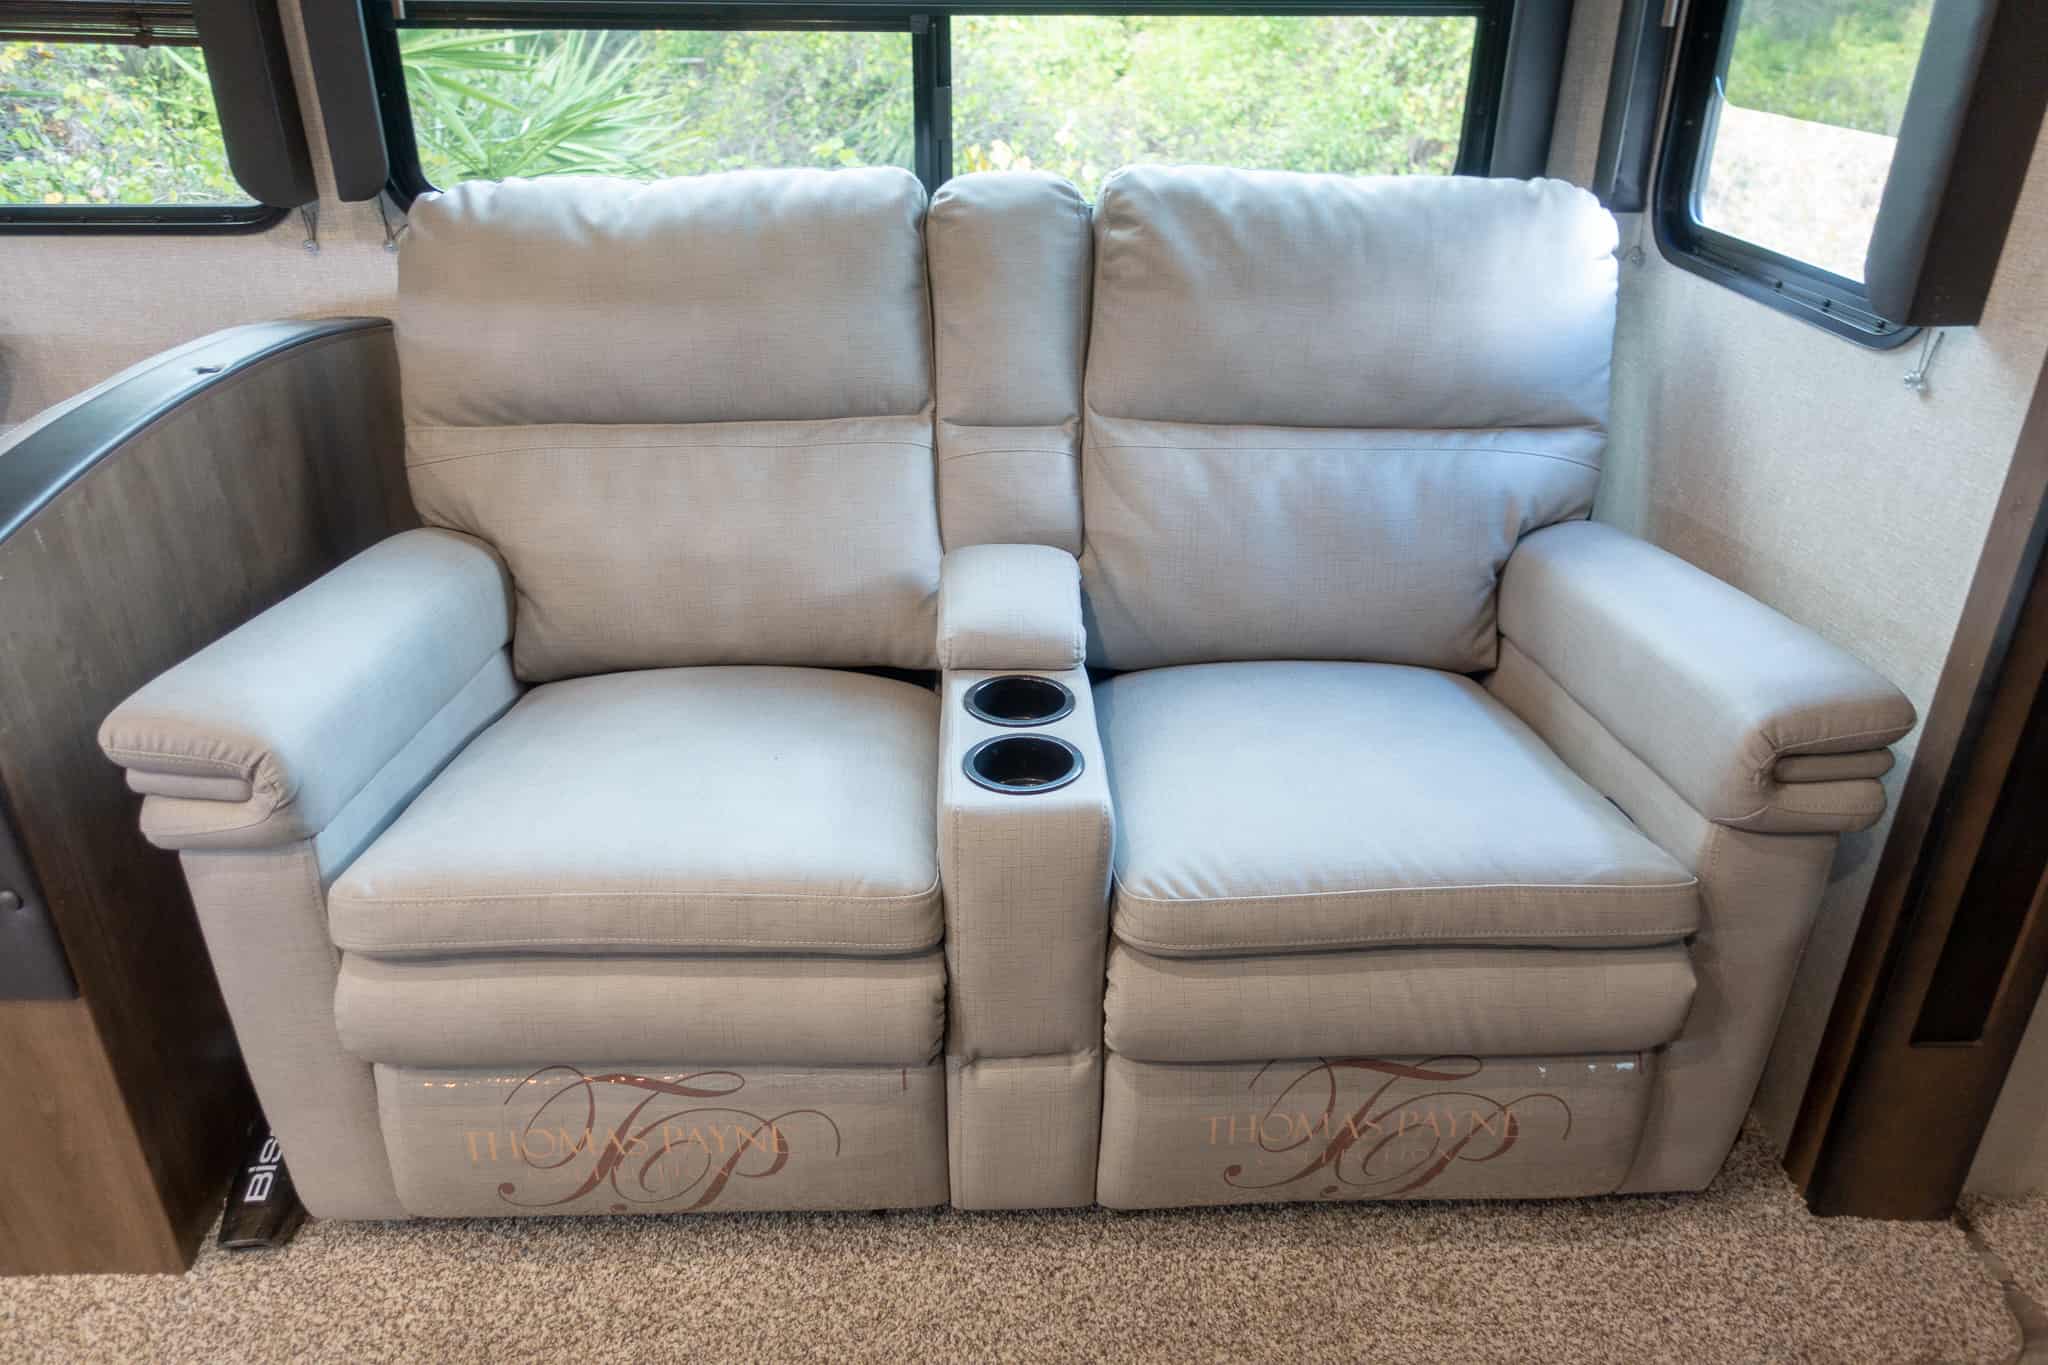 travel trailer seat replacement